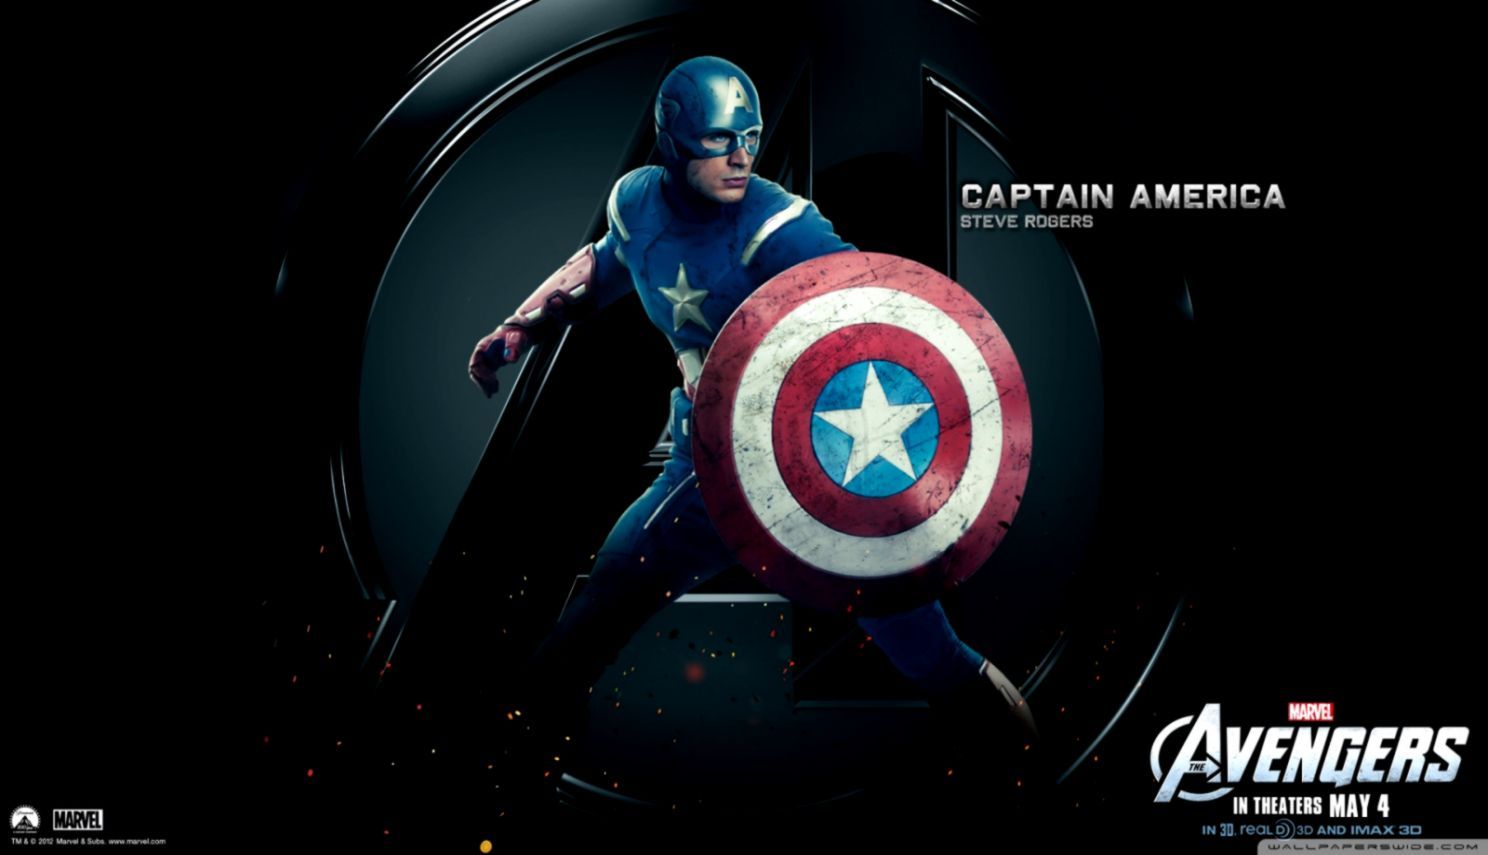 Live Wallpapers tagged with Marvel